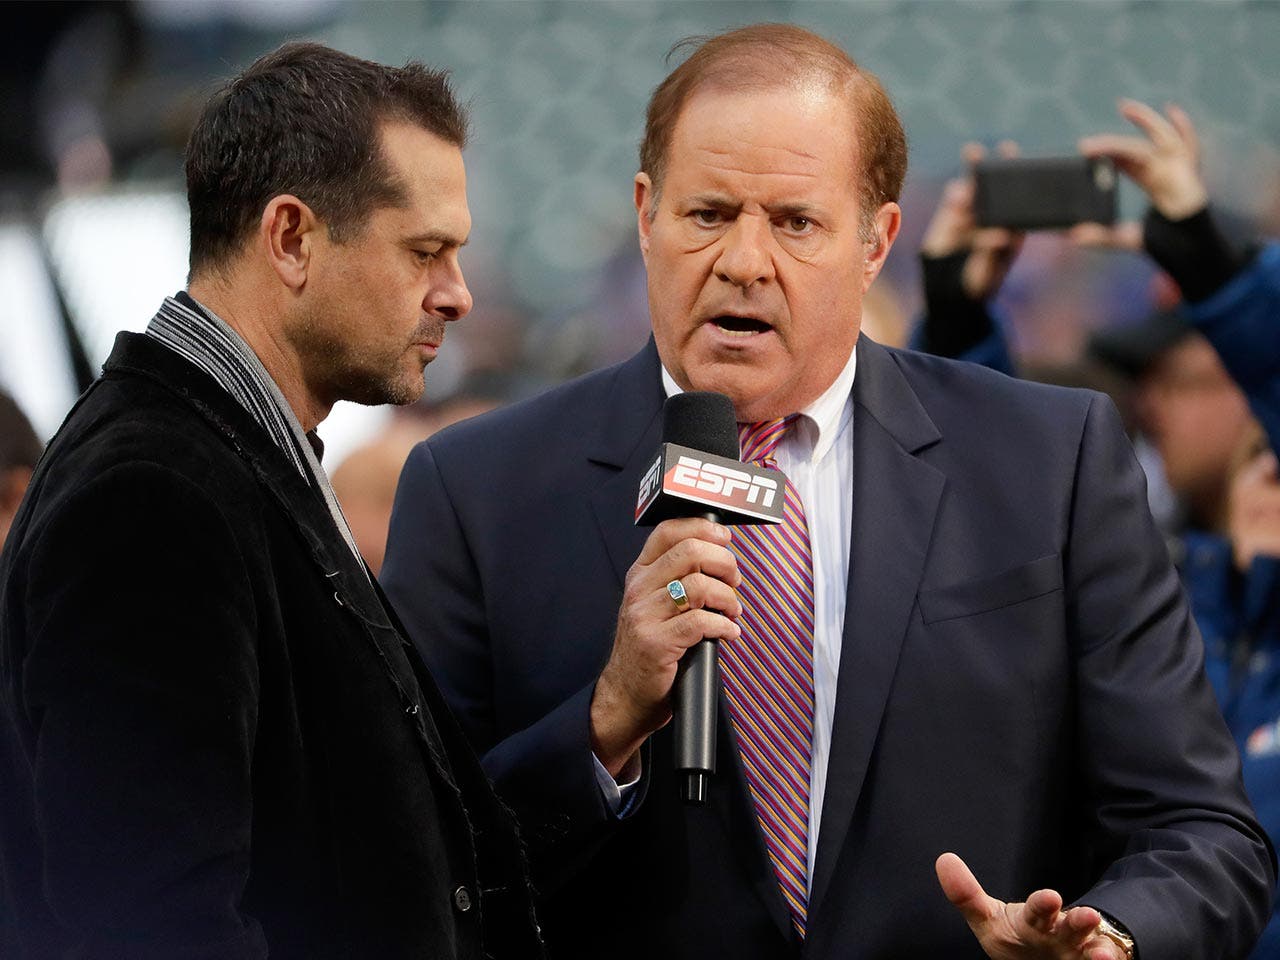 12 superrich Super Bowl broadcasters